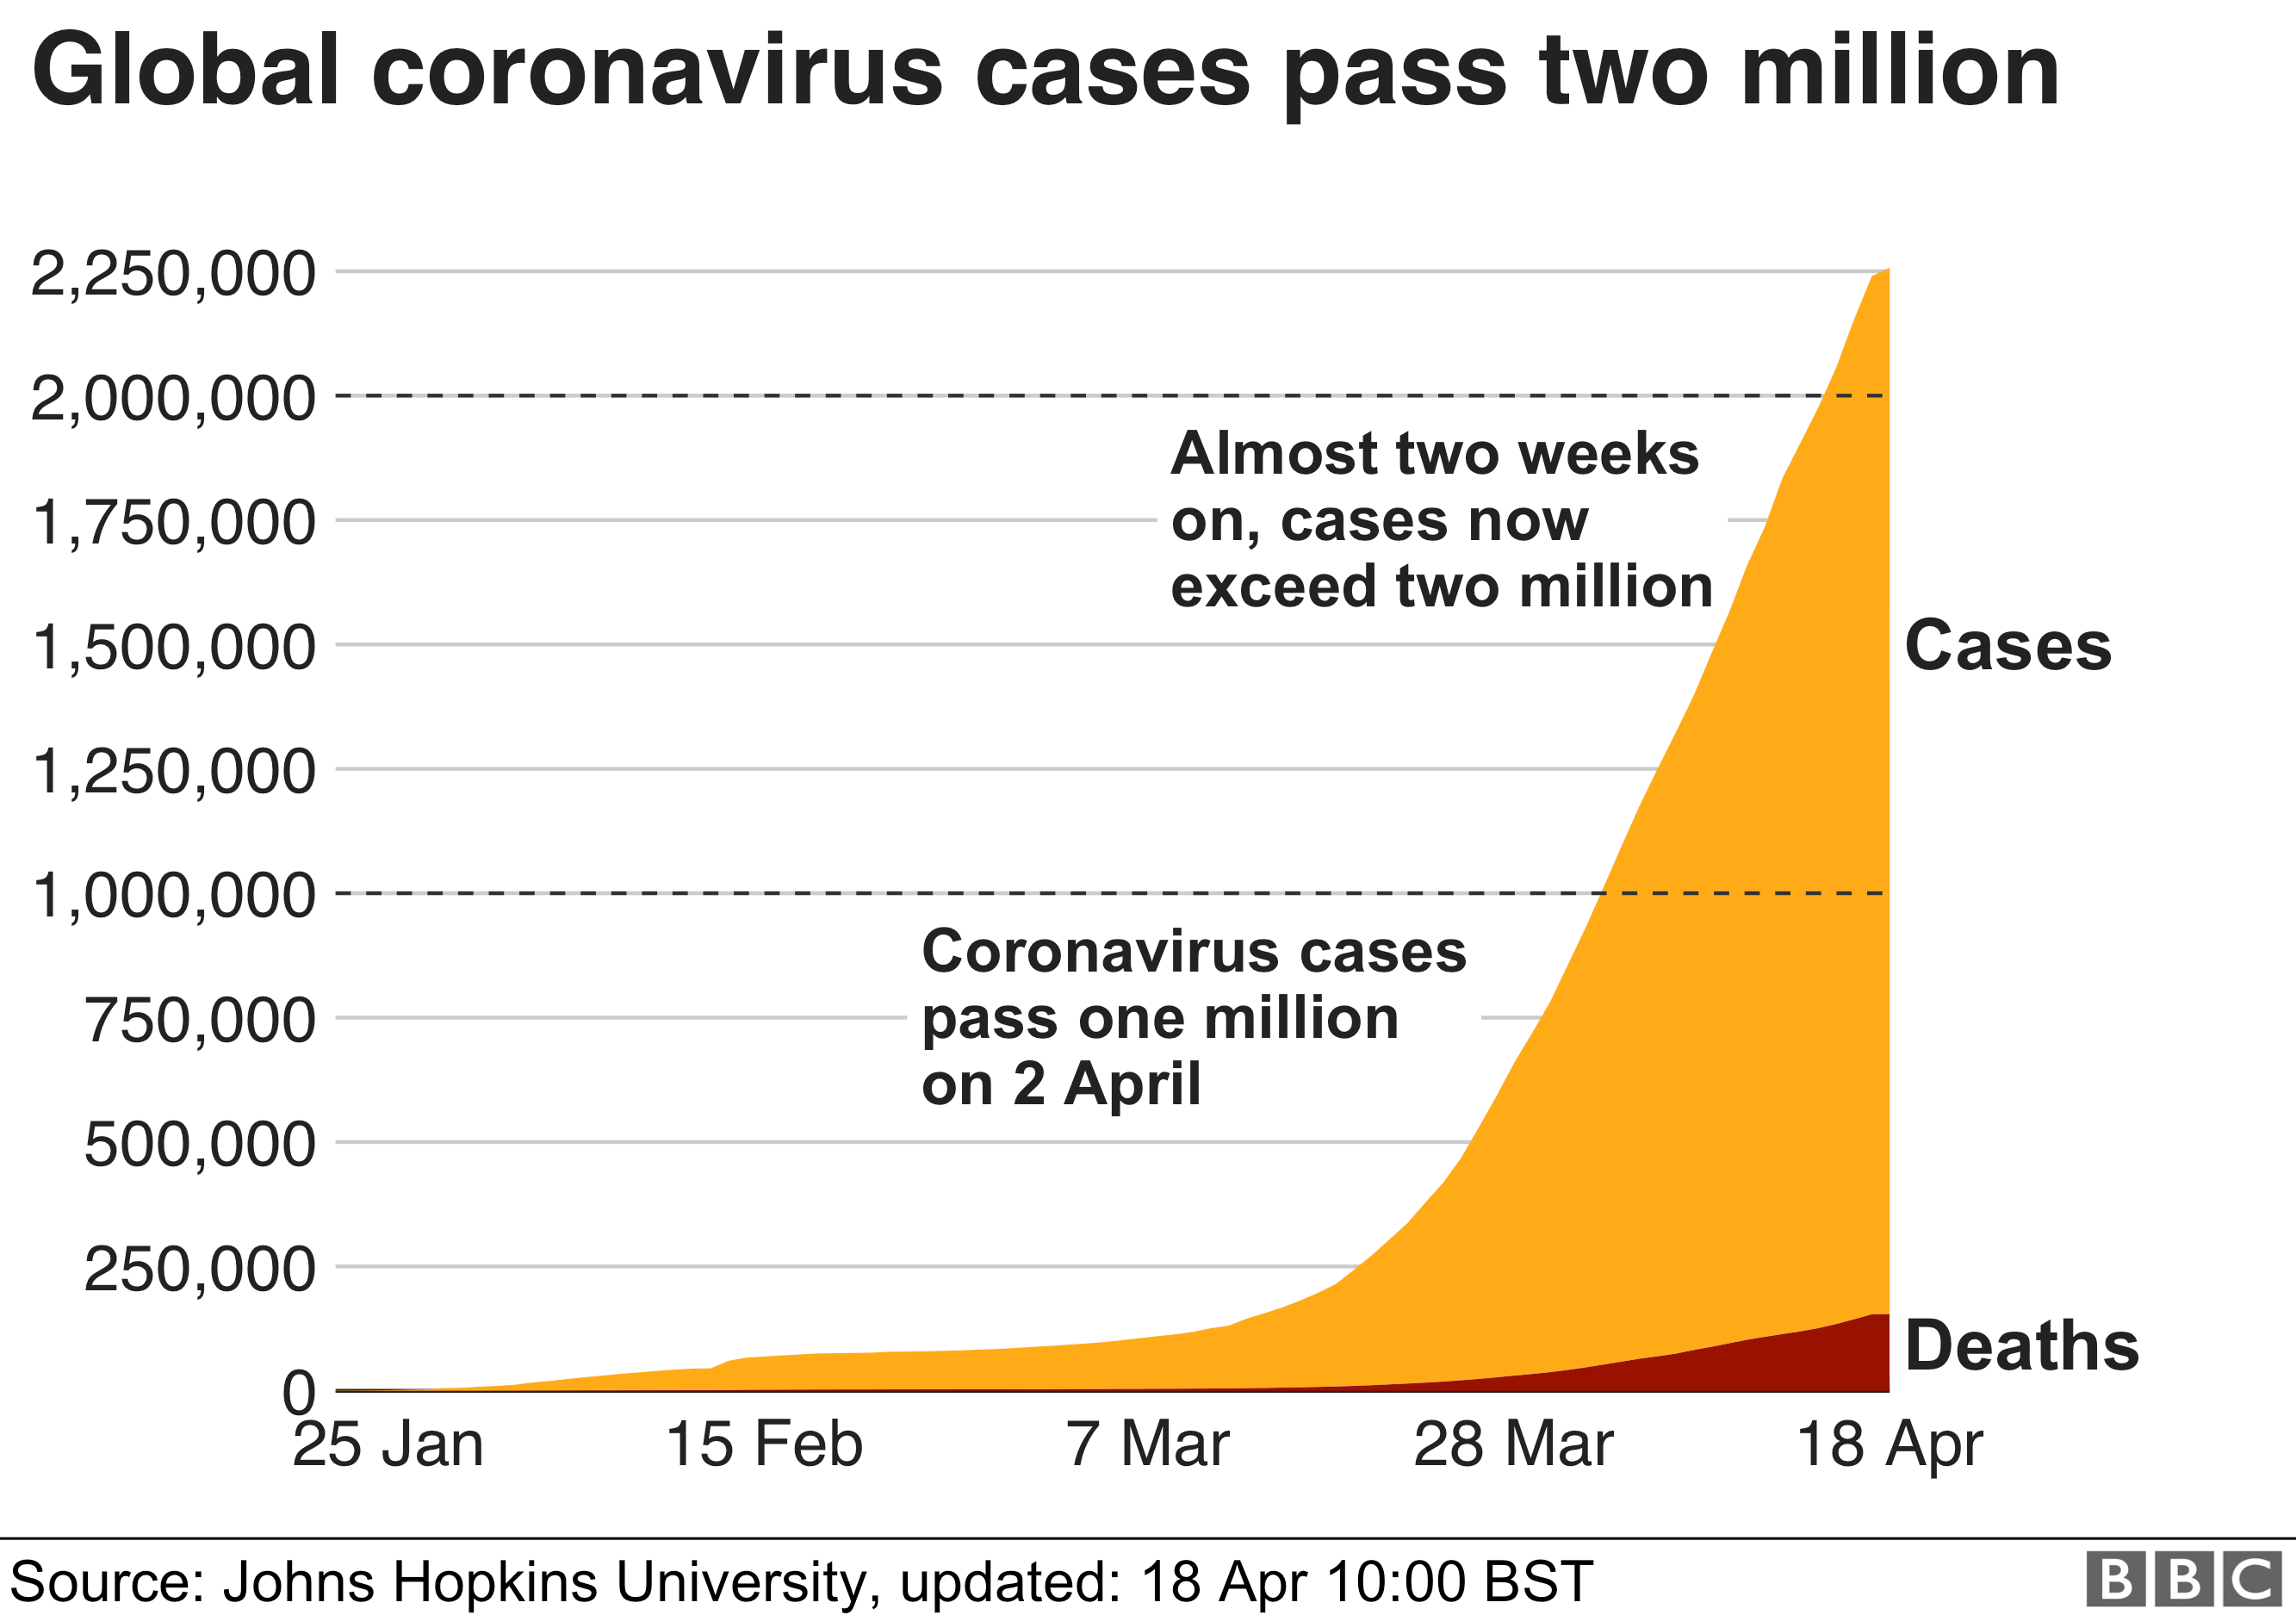 Graph showing the number of coronavirus cases worldwide